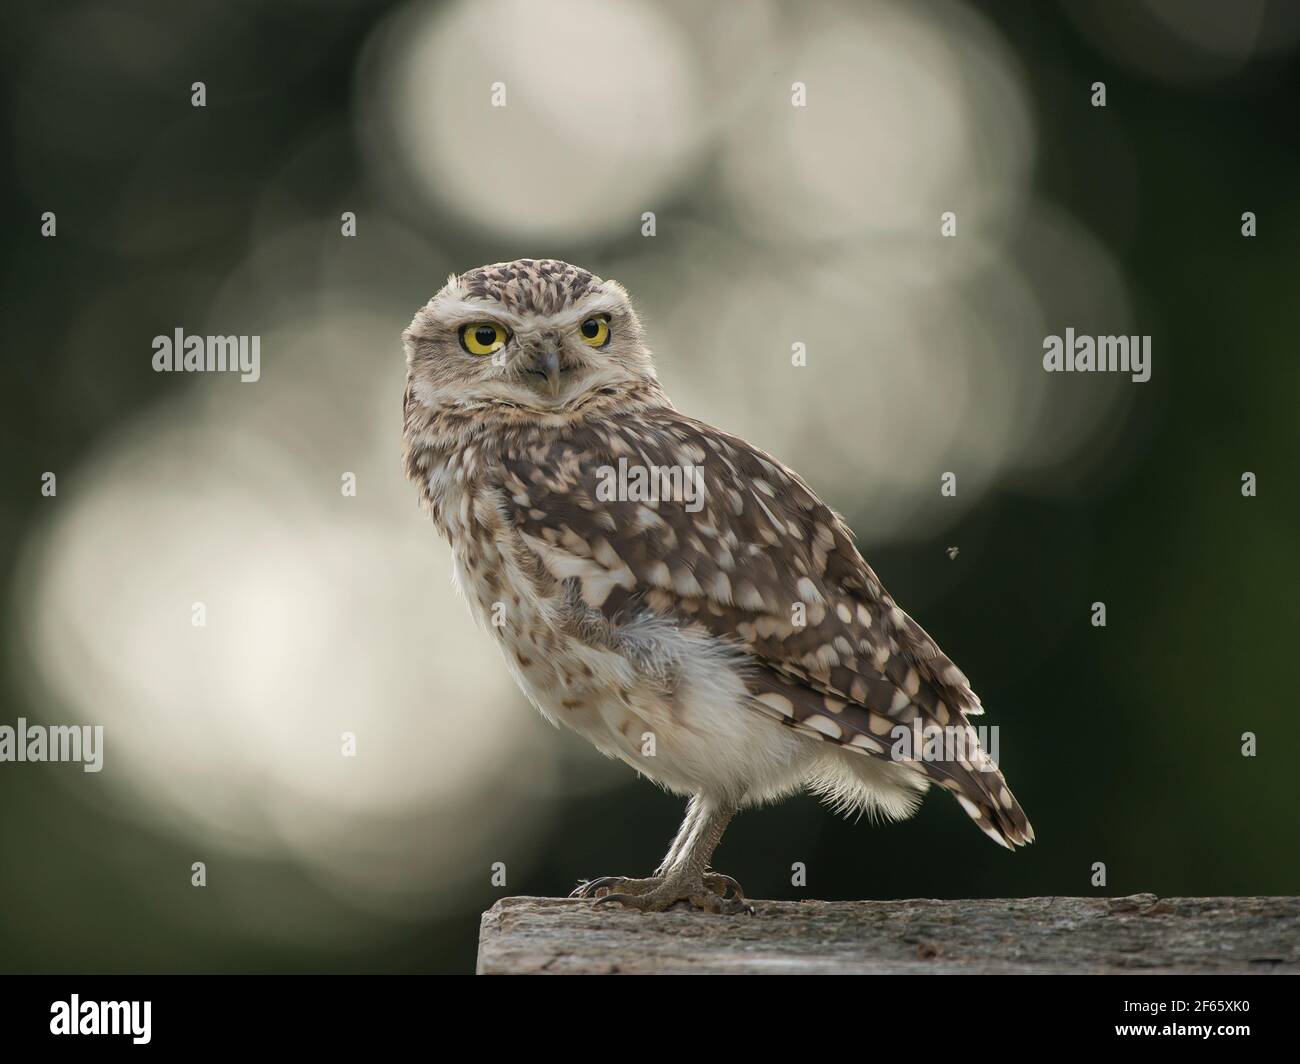 Burrowing owl seen from the side on a natural green background with bokeh Stock Photo